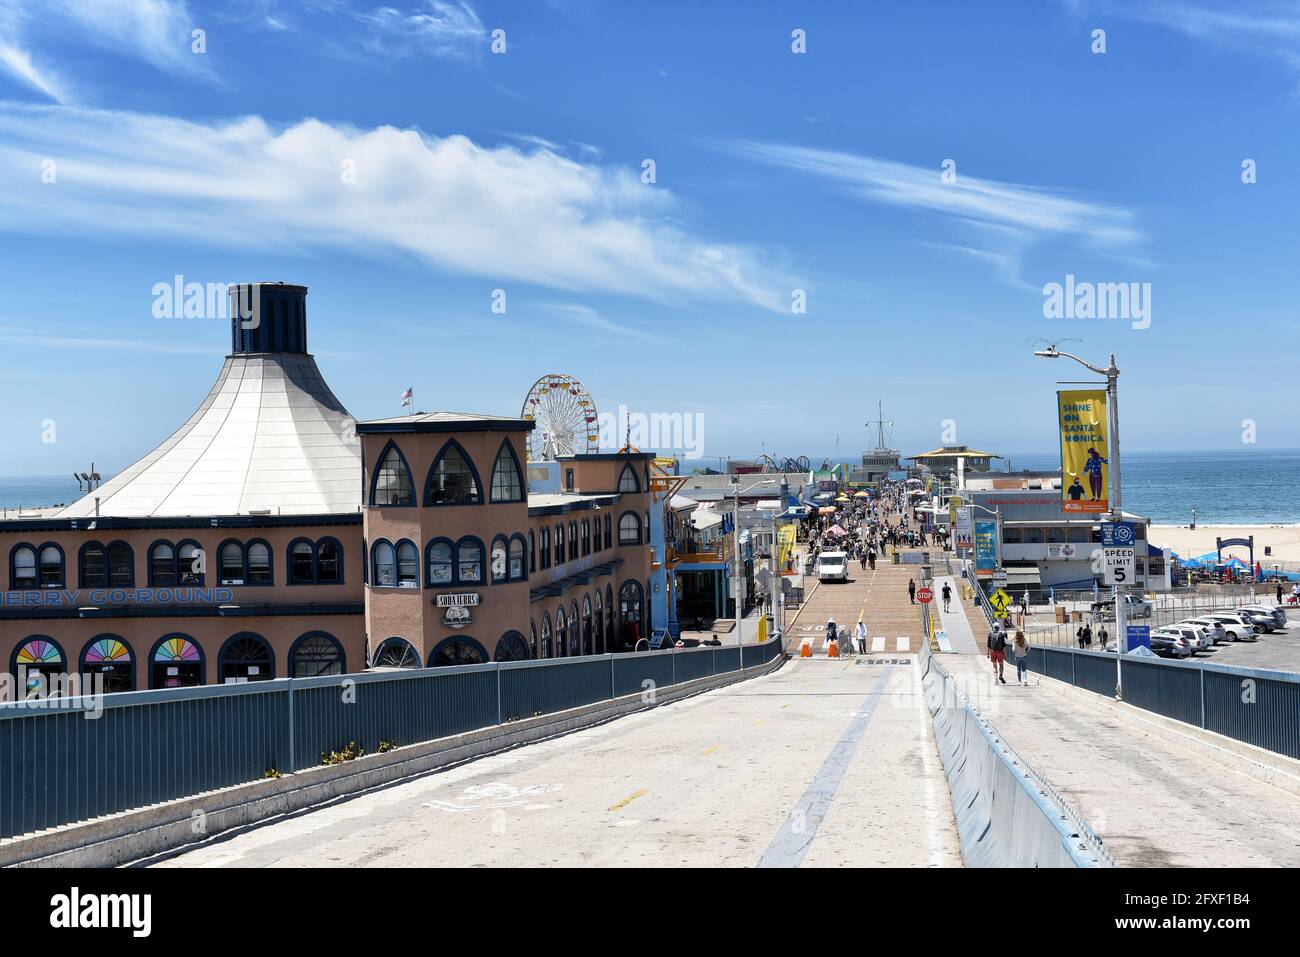 SANTA MONICA, CALIFORNIA - 25 MAY 2021: The historic Pier with the Merry-go-Round building, restaurants and Pacific Park amusement rides. Stock Photo